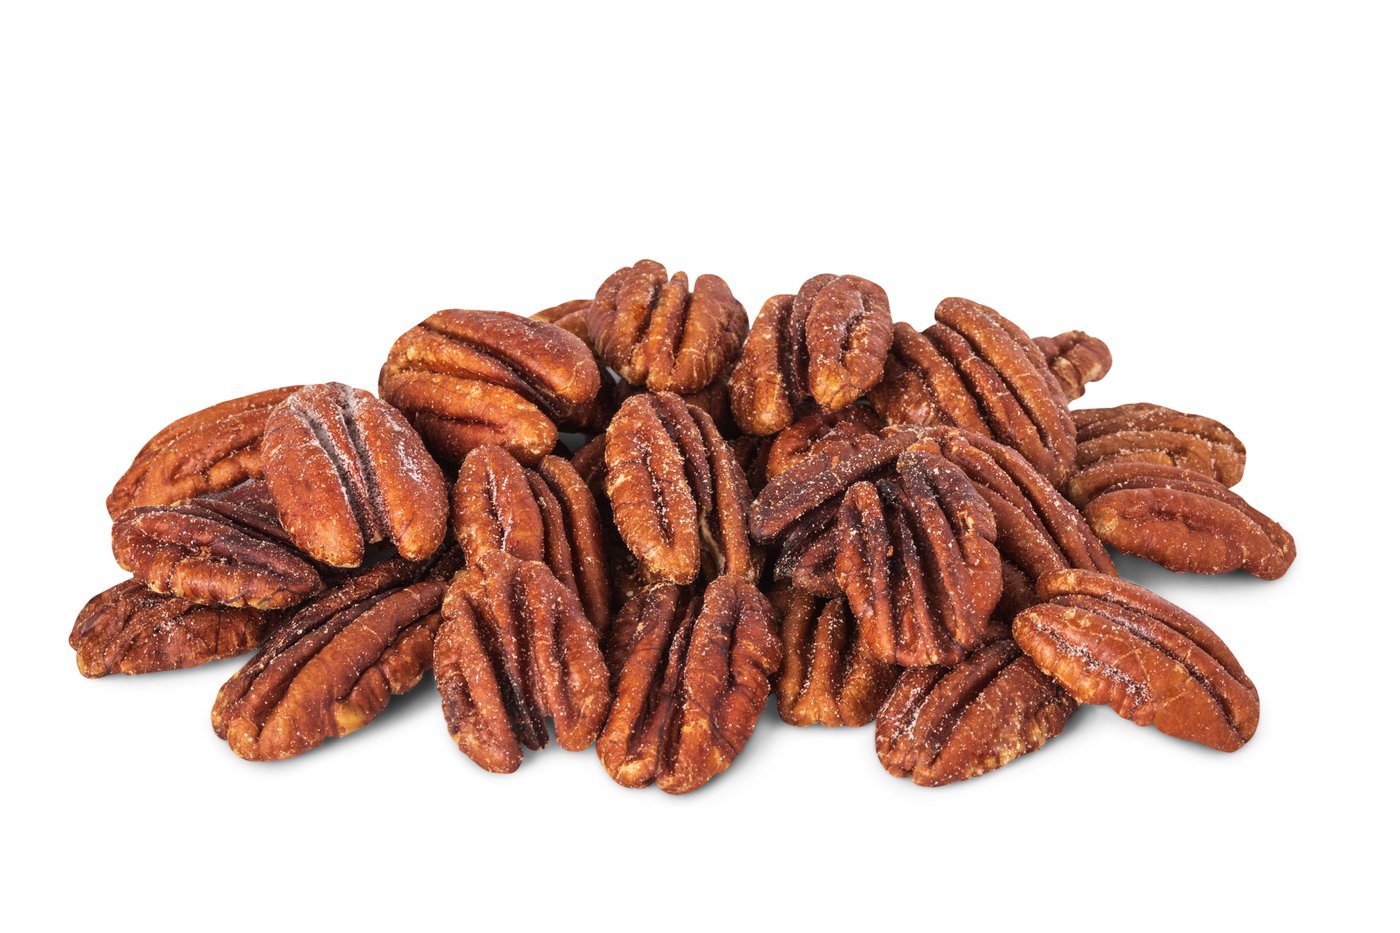 Roasted Pecans (Salted) photo